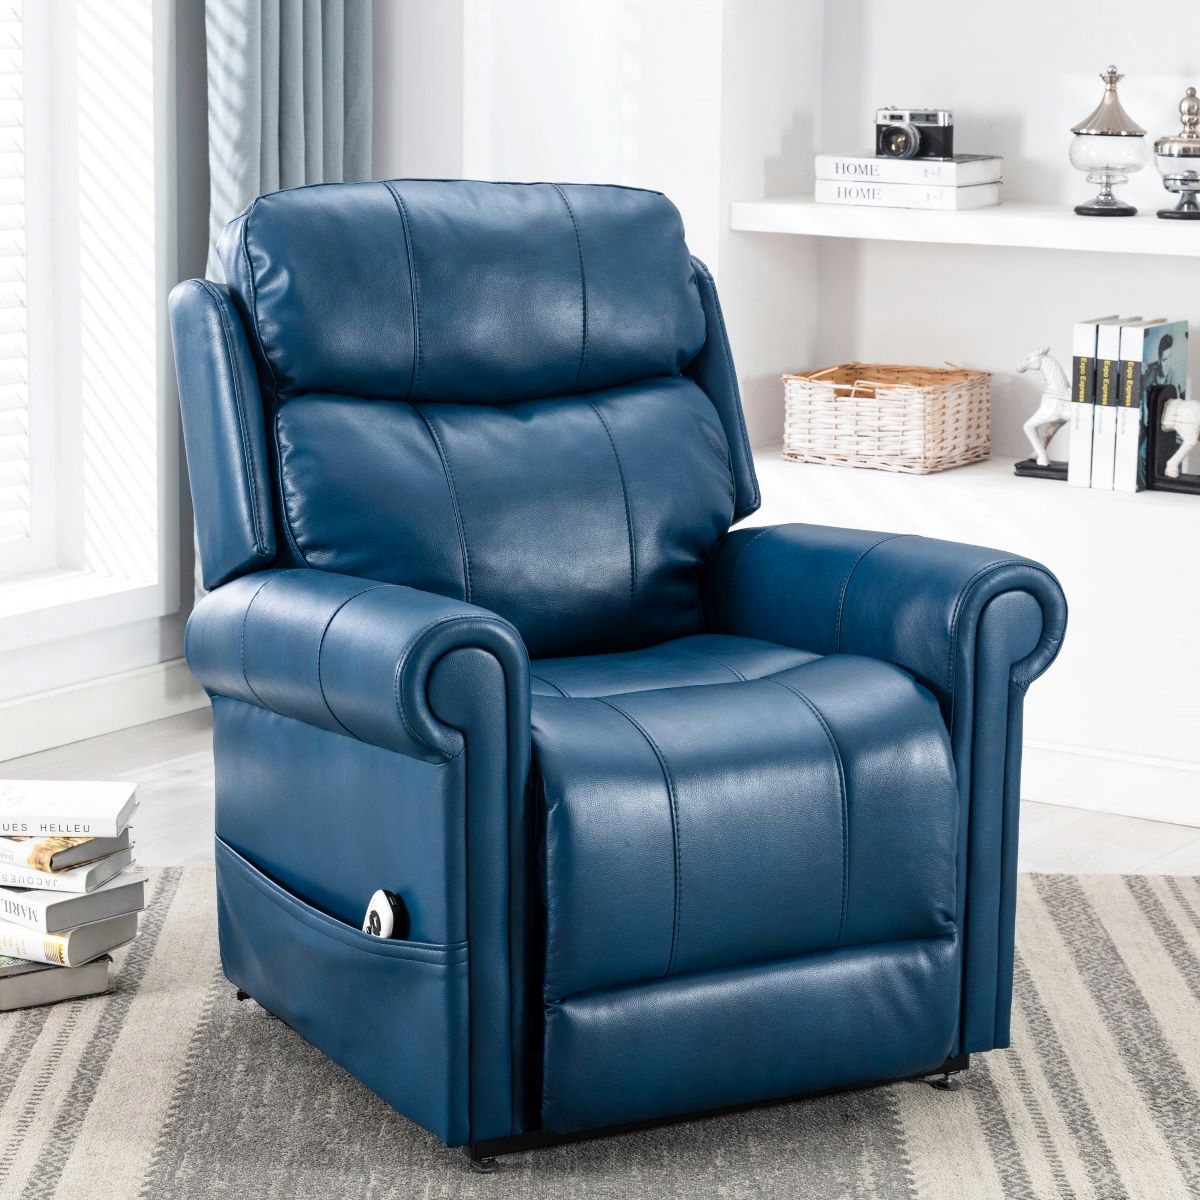 How To Clean Faux Leather Recliner